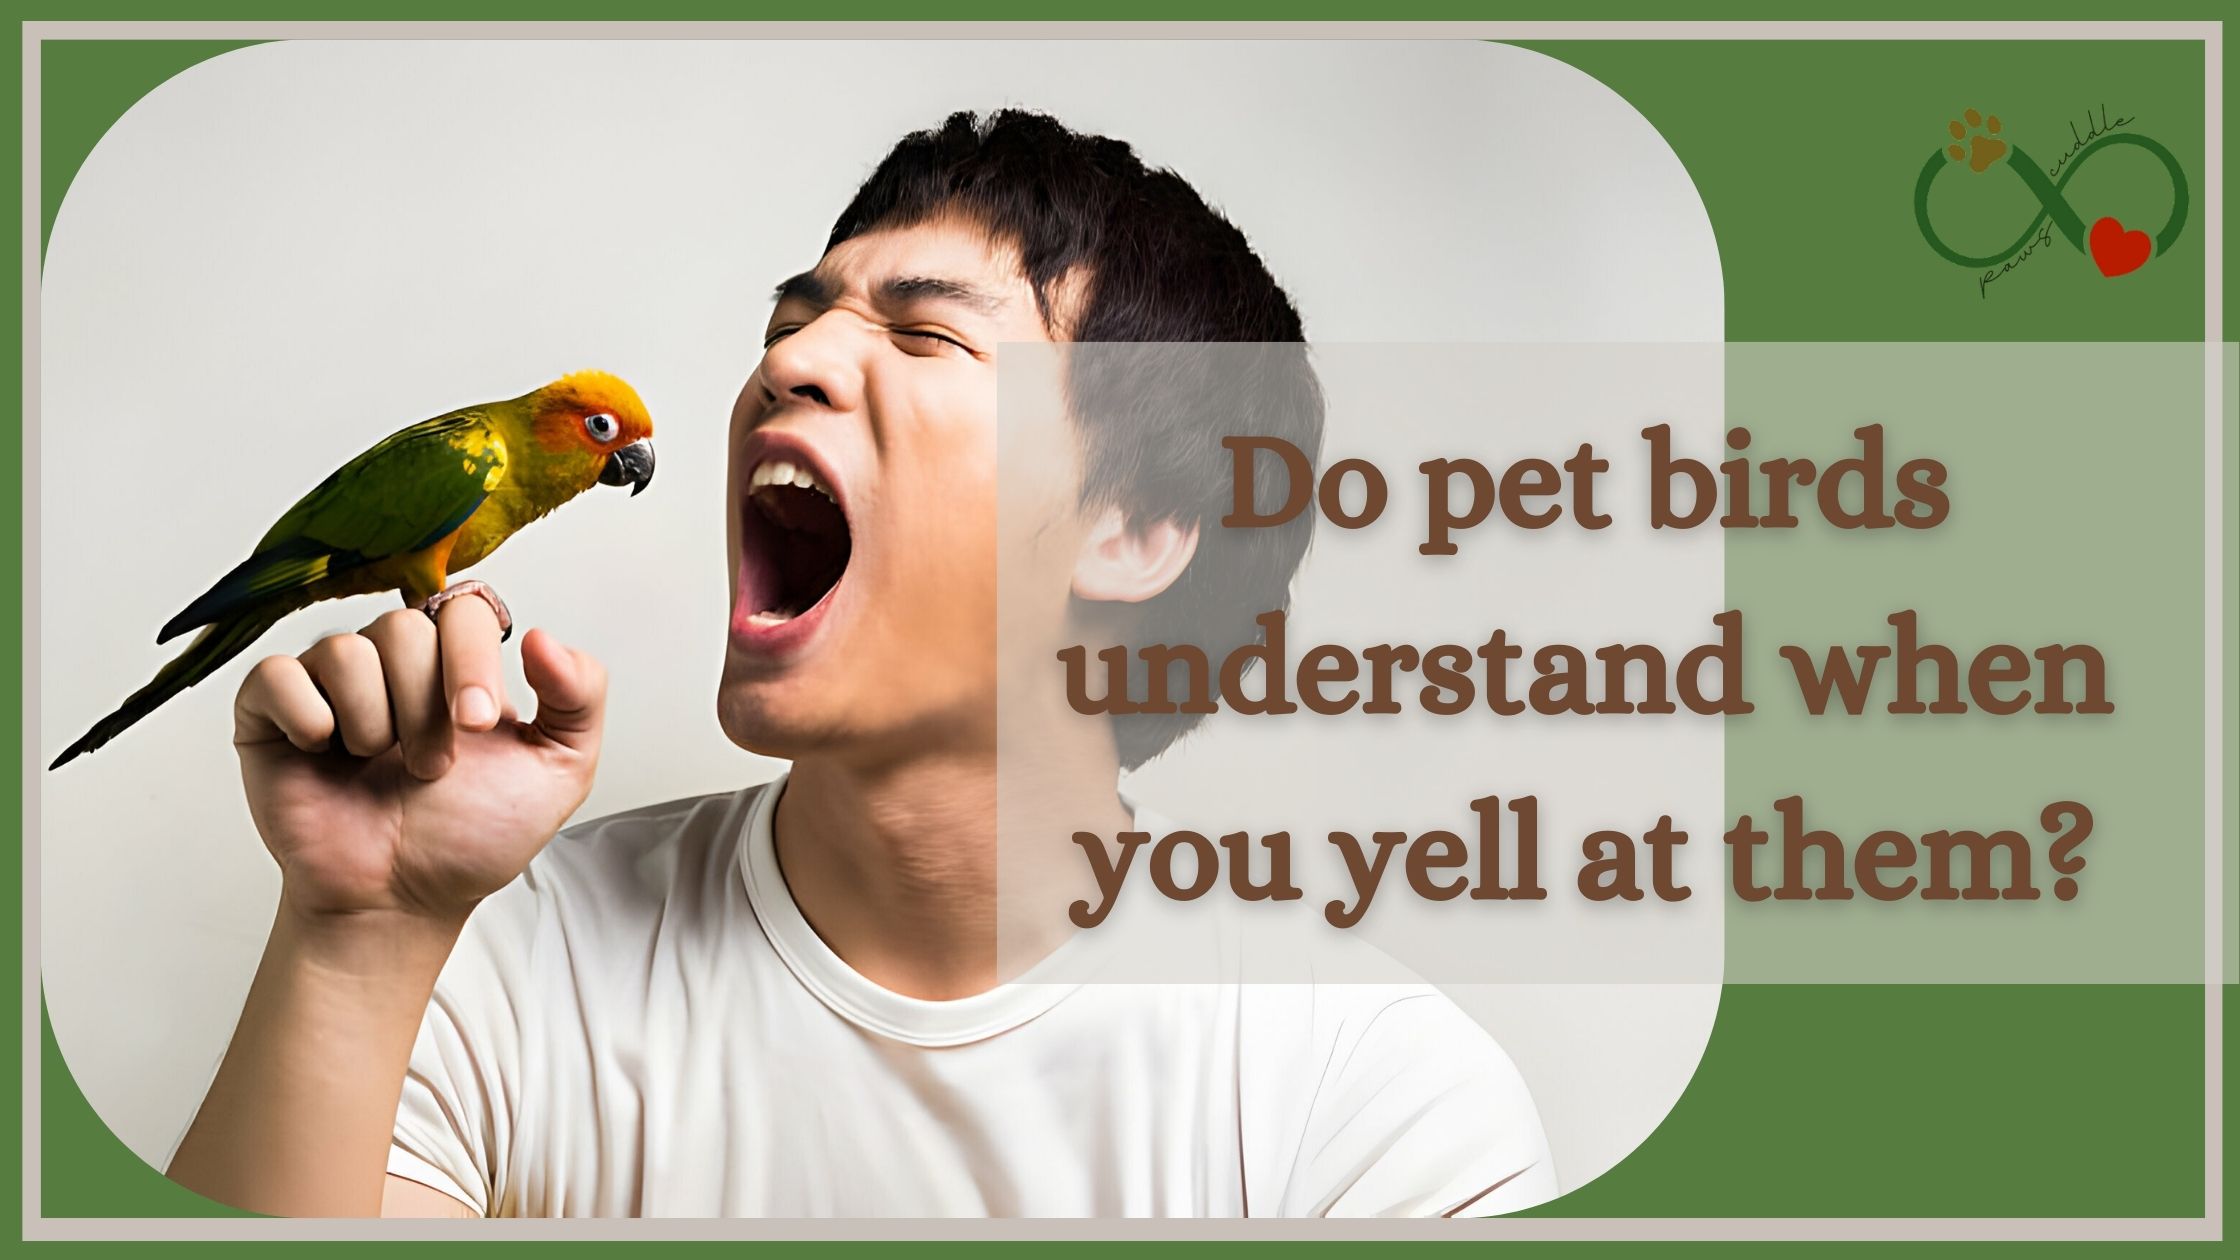 Do pet birds understand when you yell at them?